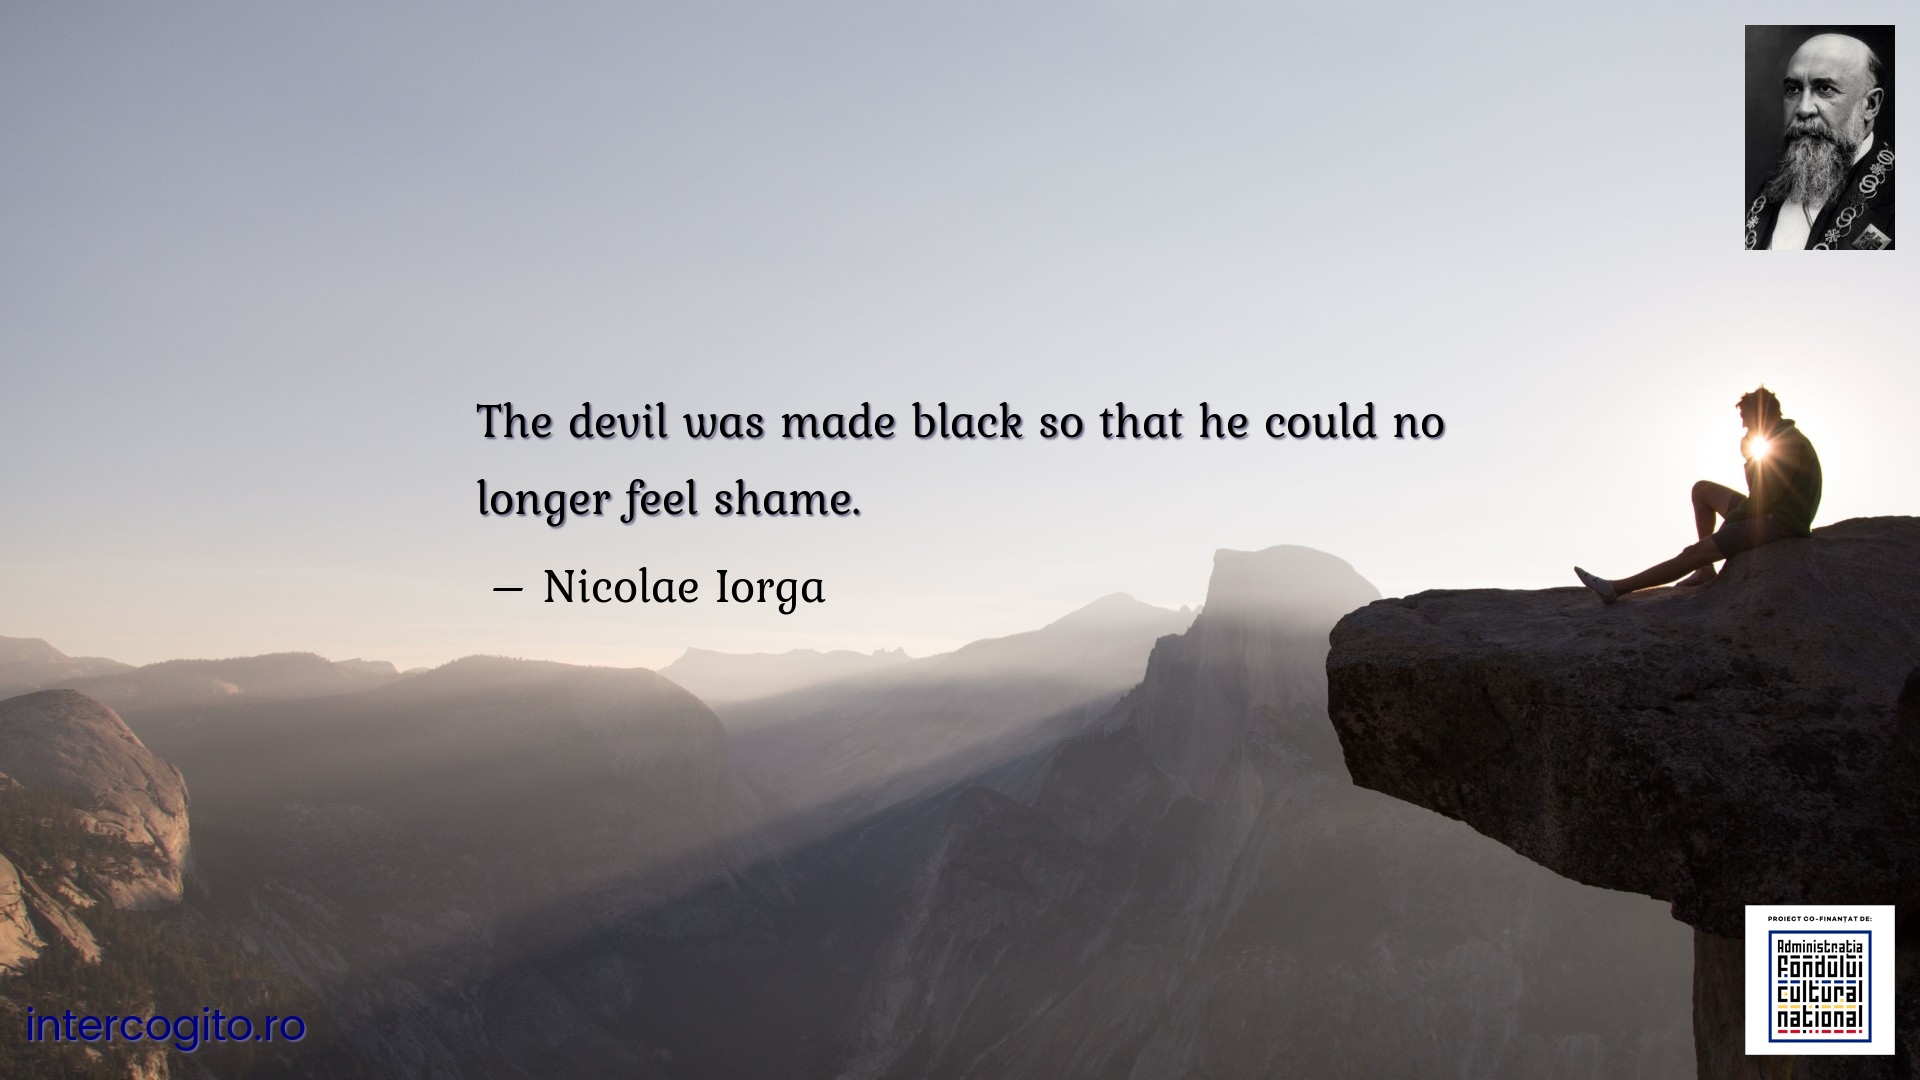 The devil was made black so that he could no longer feel shame.